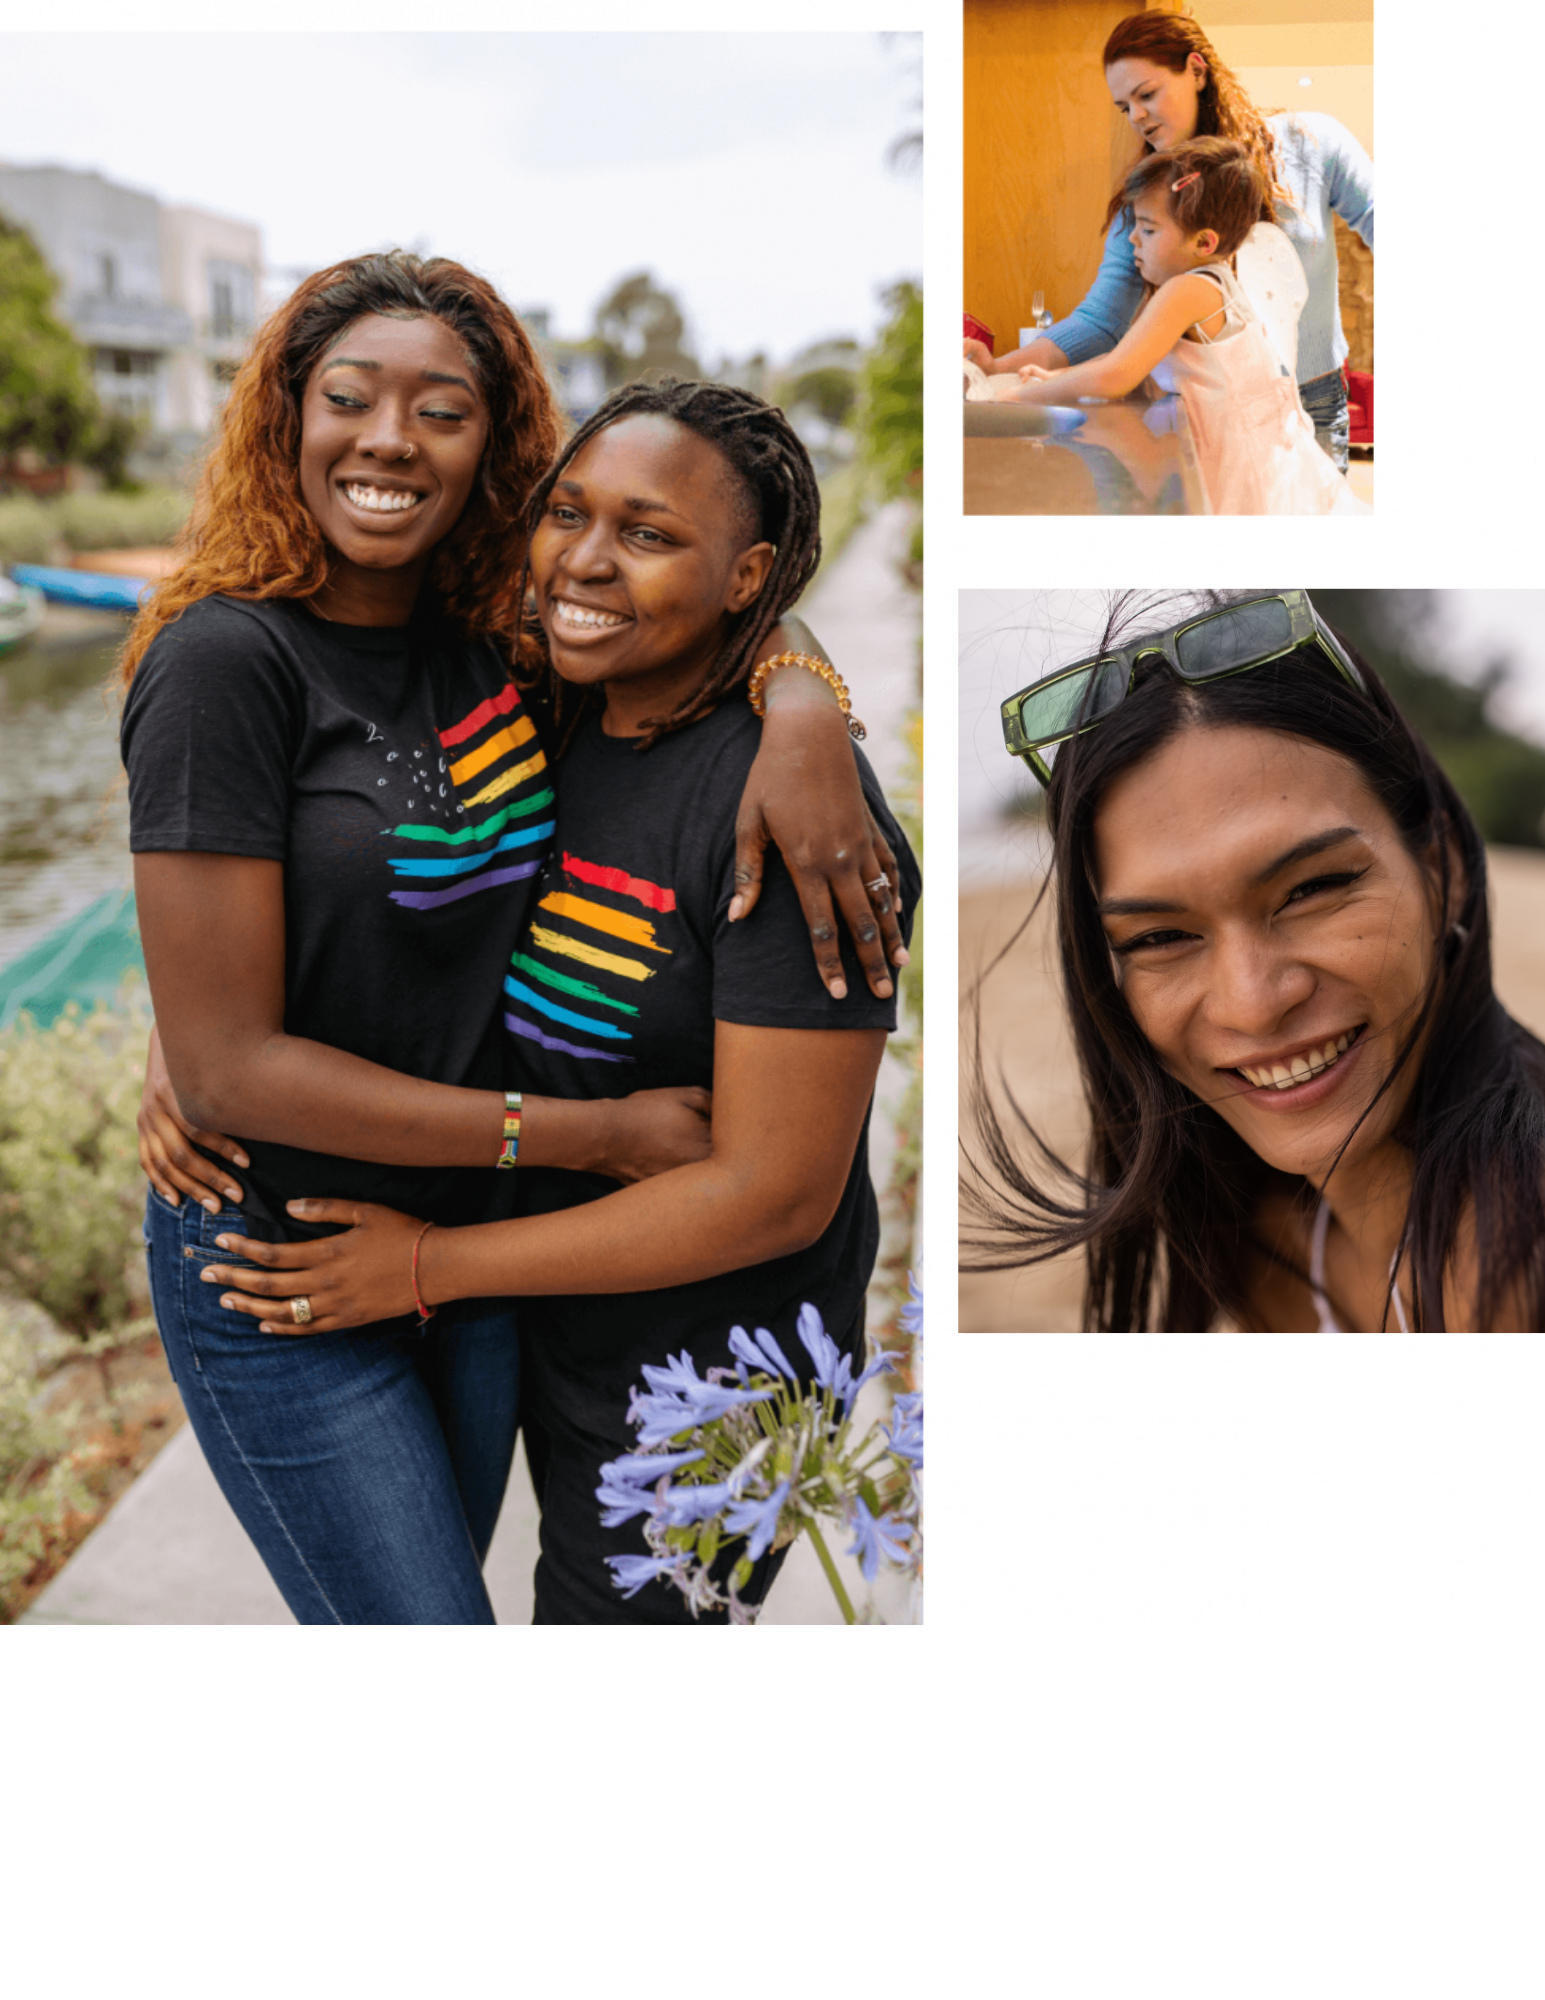 Three images. 1) Who people smiling hugging each other wearing black shirts with rainbow flags on them. 2) A person with long hair standing at a counter with a small child wearing a dress and a barrette in their hair. 3) Smiling person with long hair and glasses on their head.